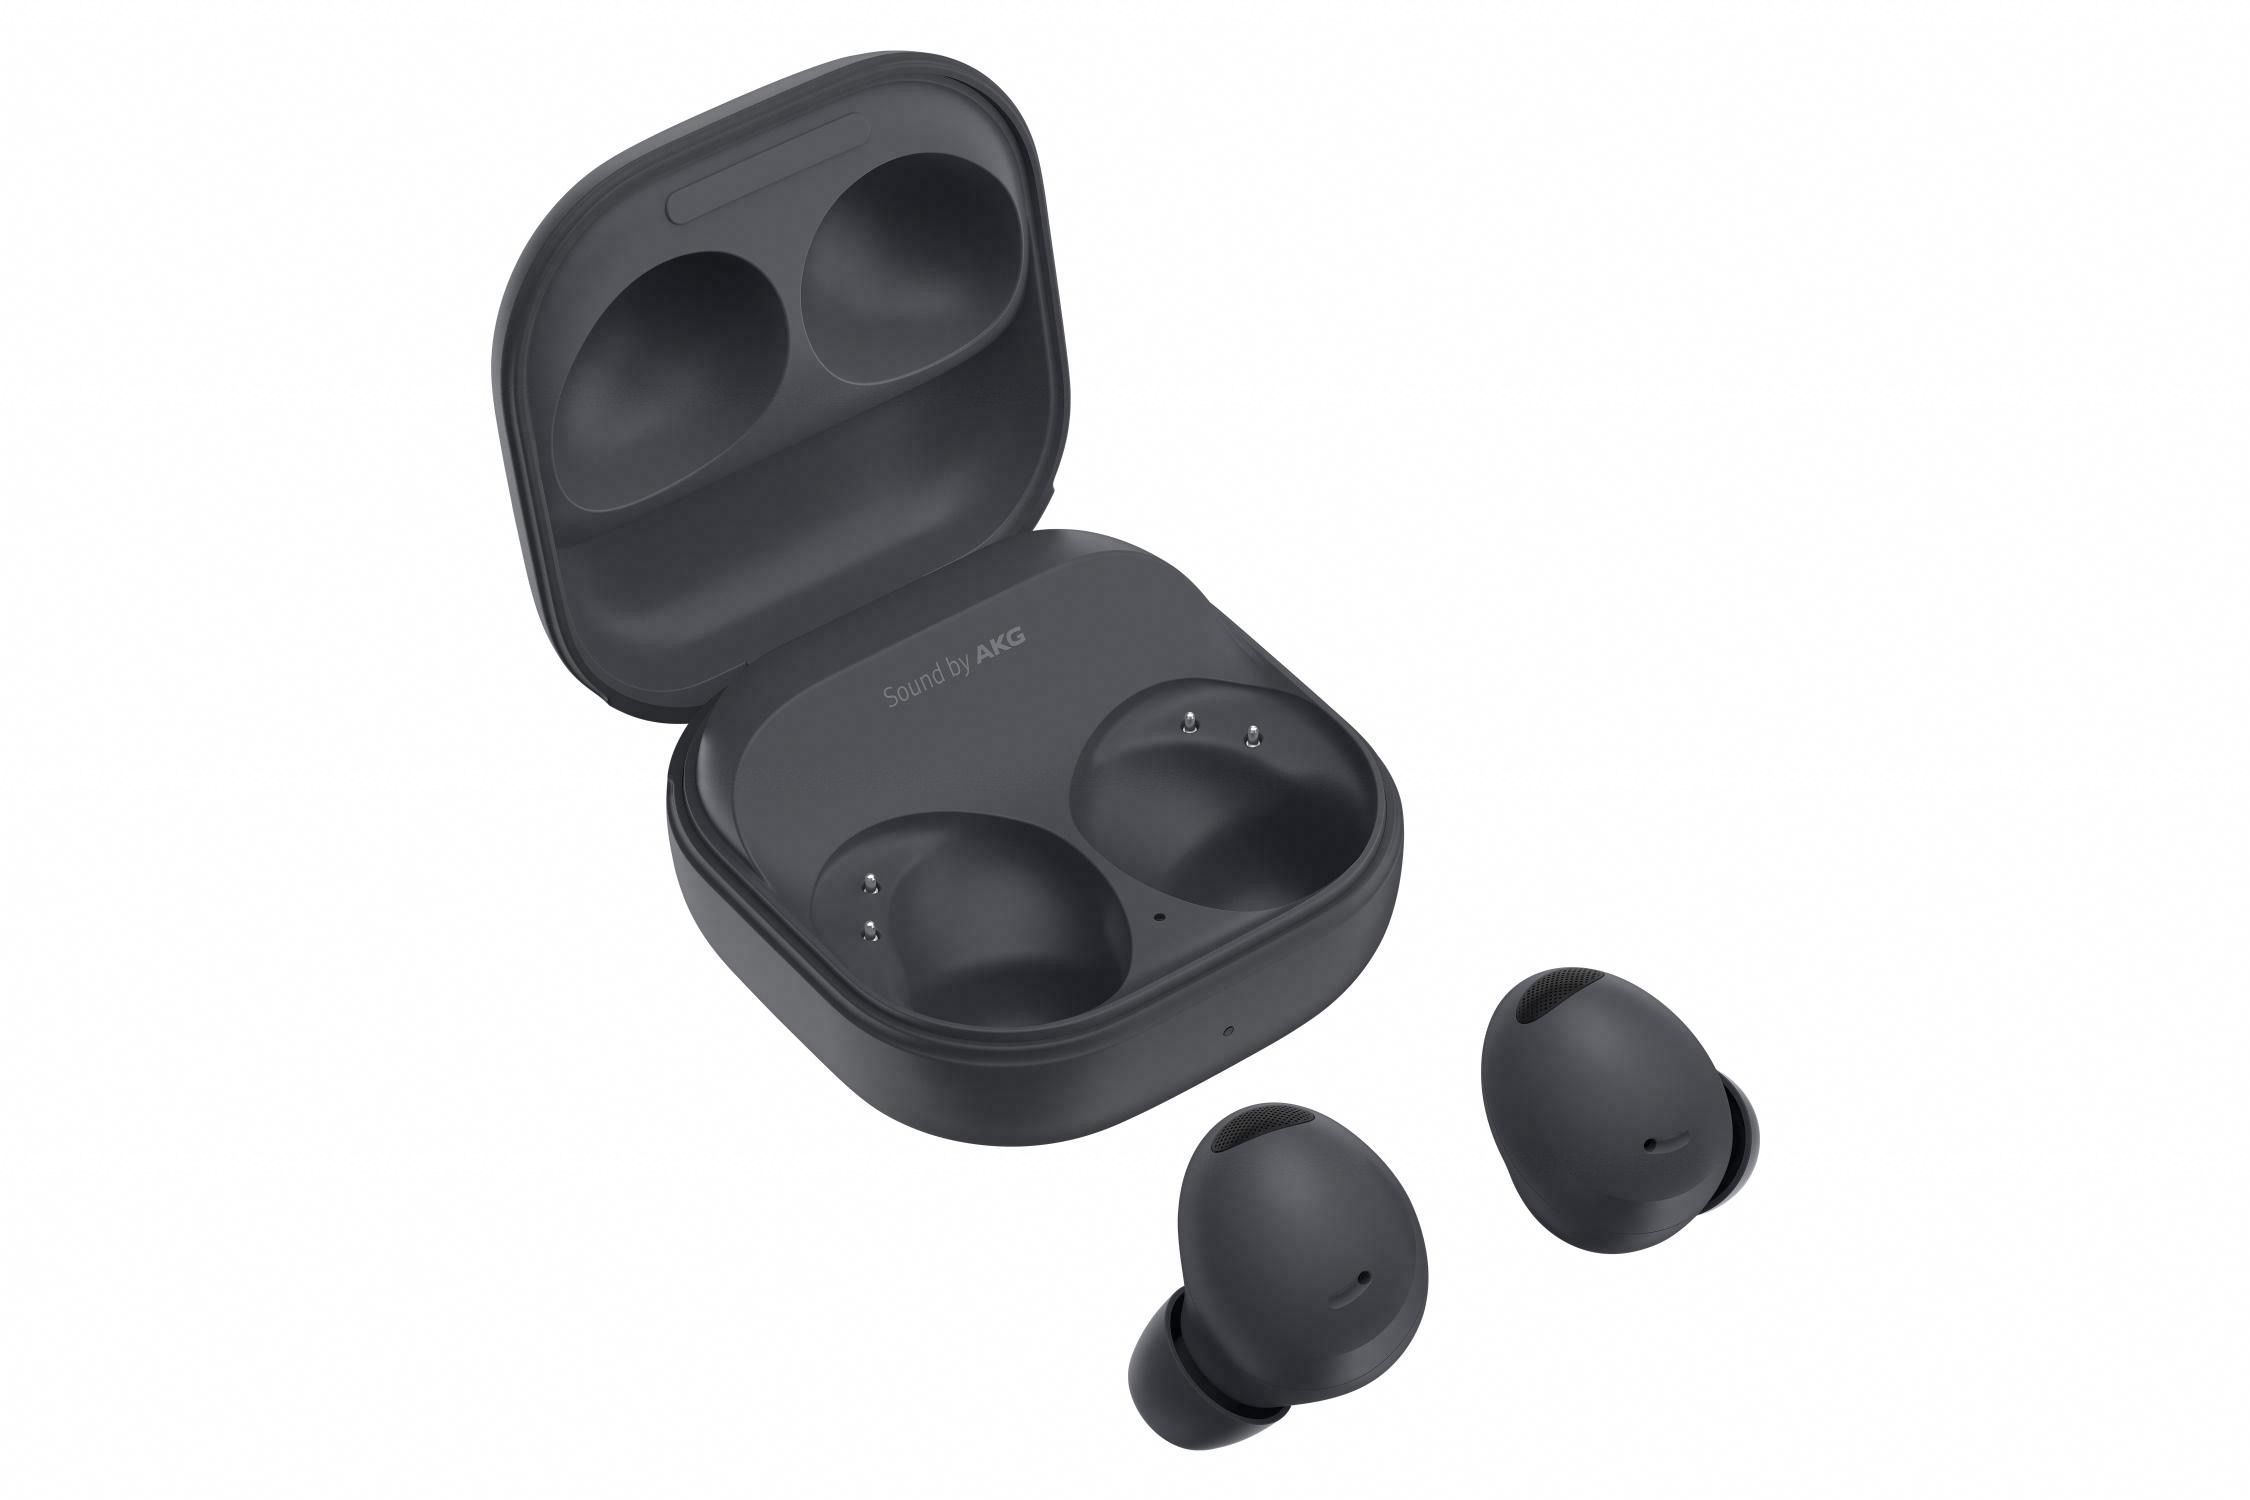 Samsung Galaxy Buds 2 Pro open with earbuds